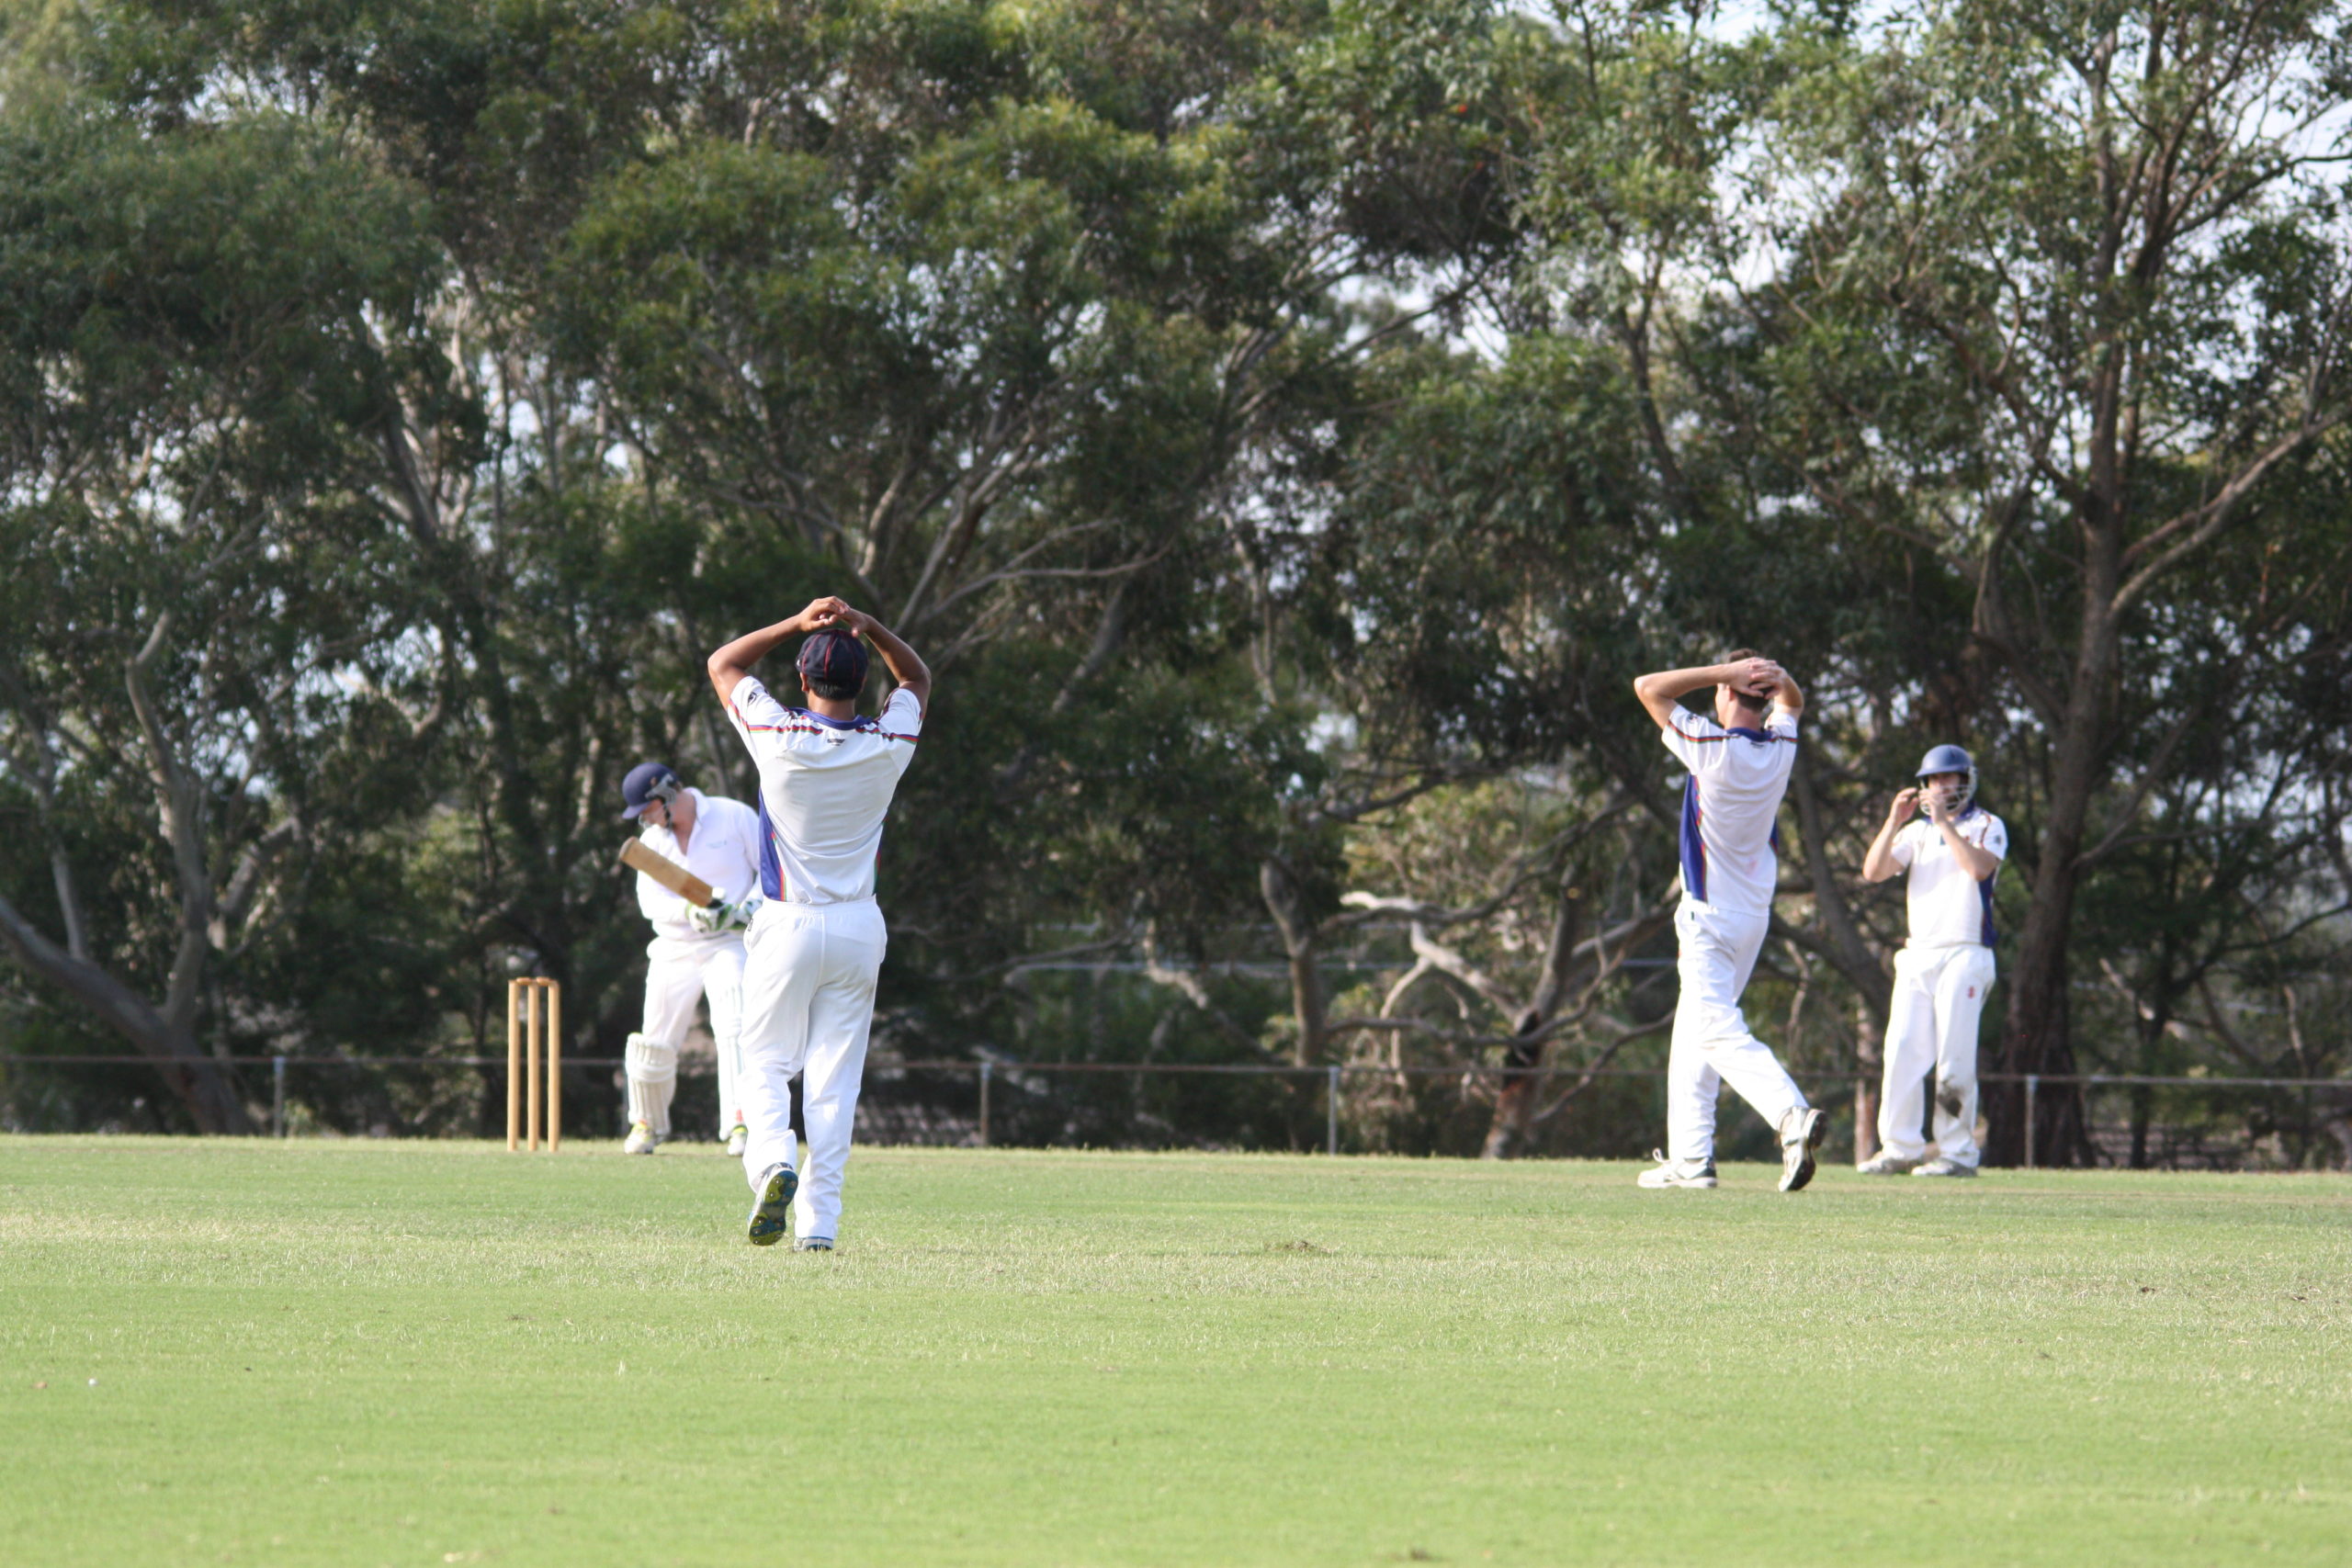 A1 Grand Final (Rofie 3) (81) Vs ARL (67) with an early miss with Scott Henderson bowling - Rofie 3 - Parklands Oval 29th and 30th March 2014.